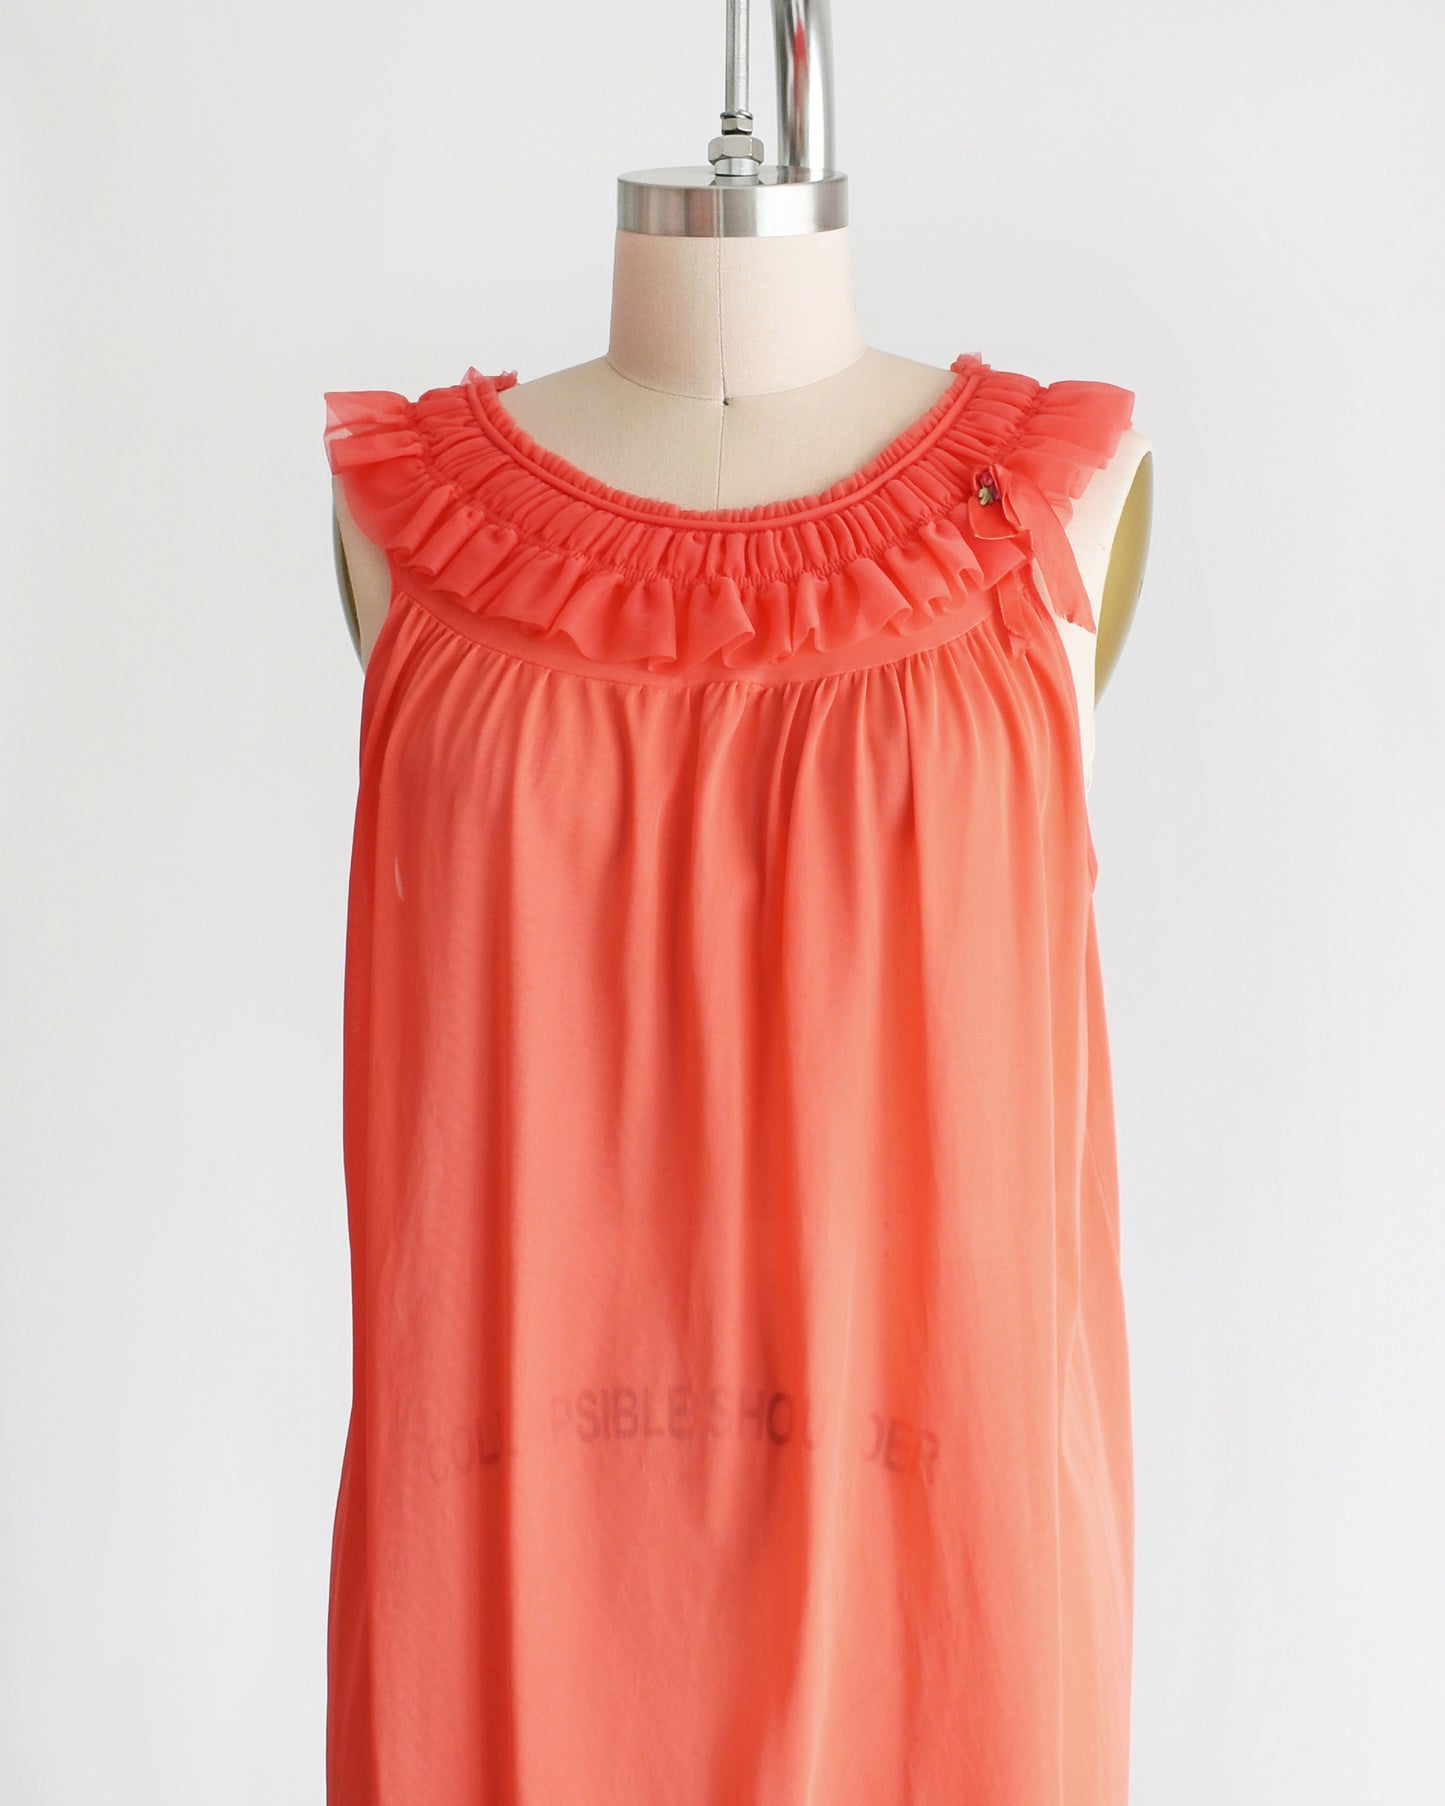 side front view of a vintage 1960s/1970s hot coral ruffle nightie that has a ruffled neckline